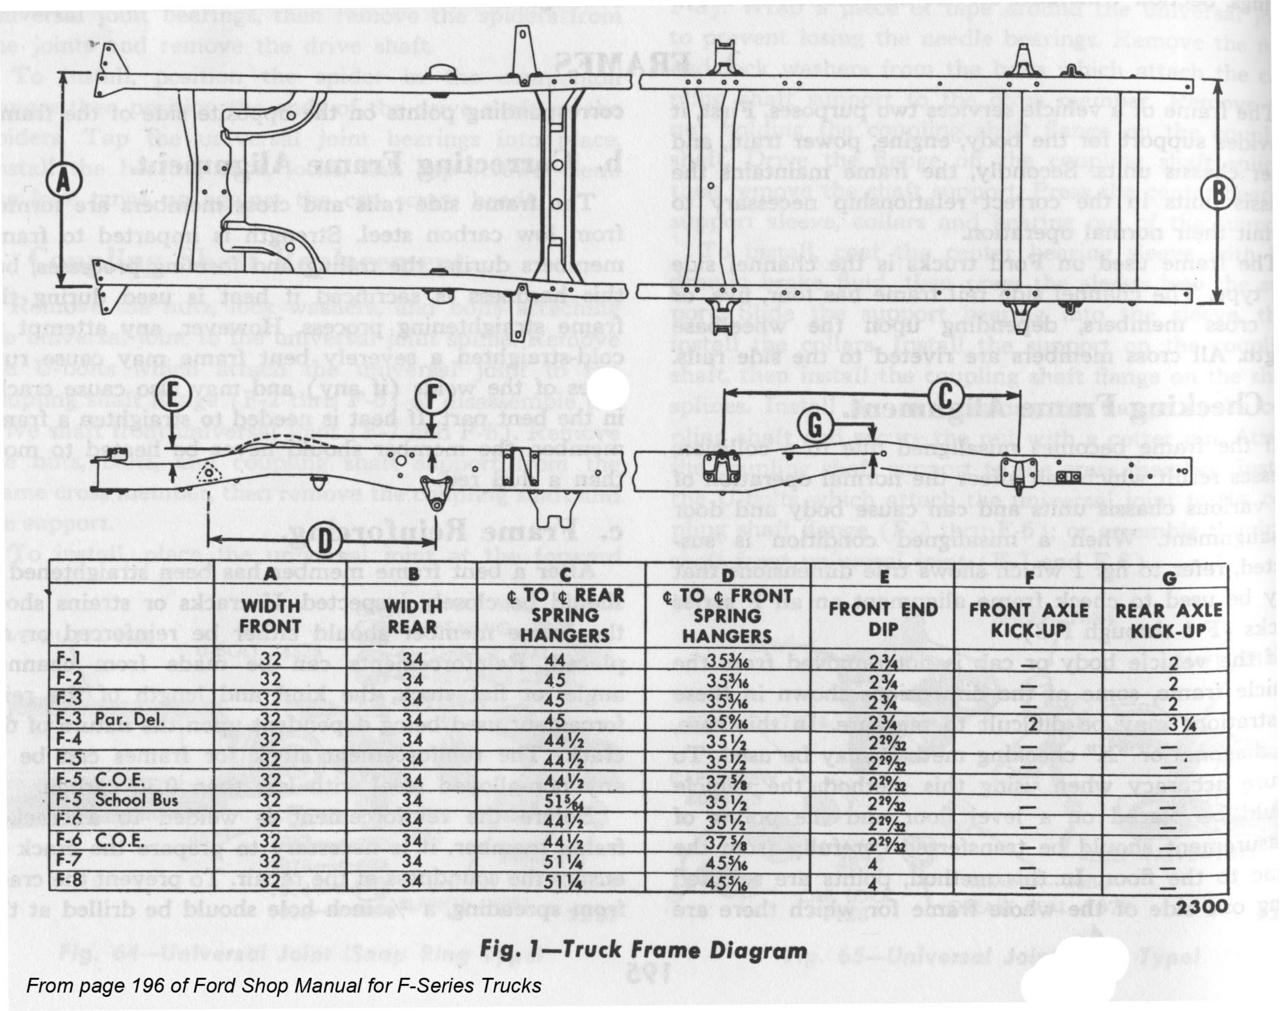 1948 Ford truck frame dimensions #1